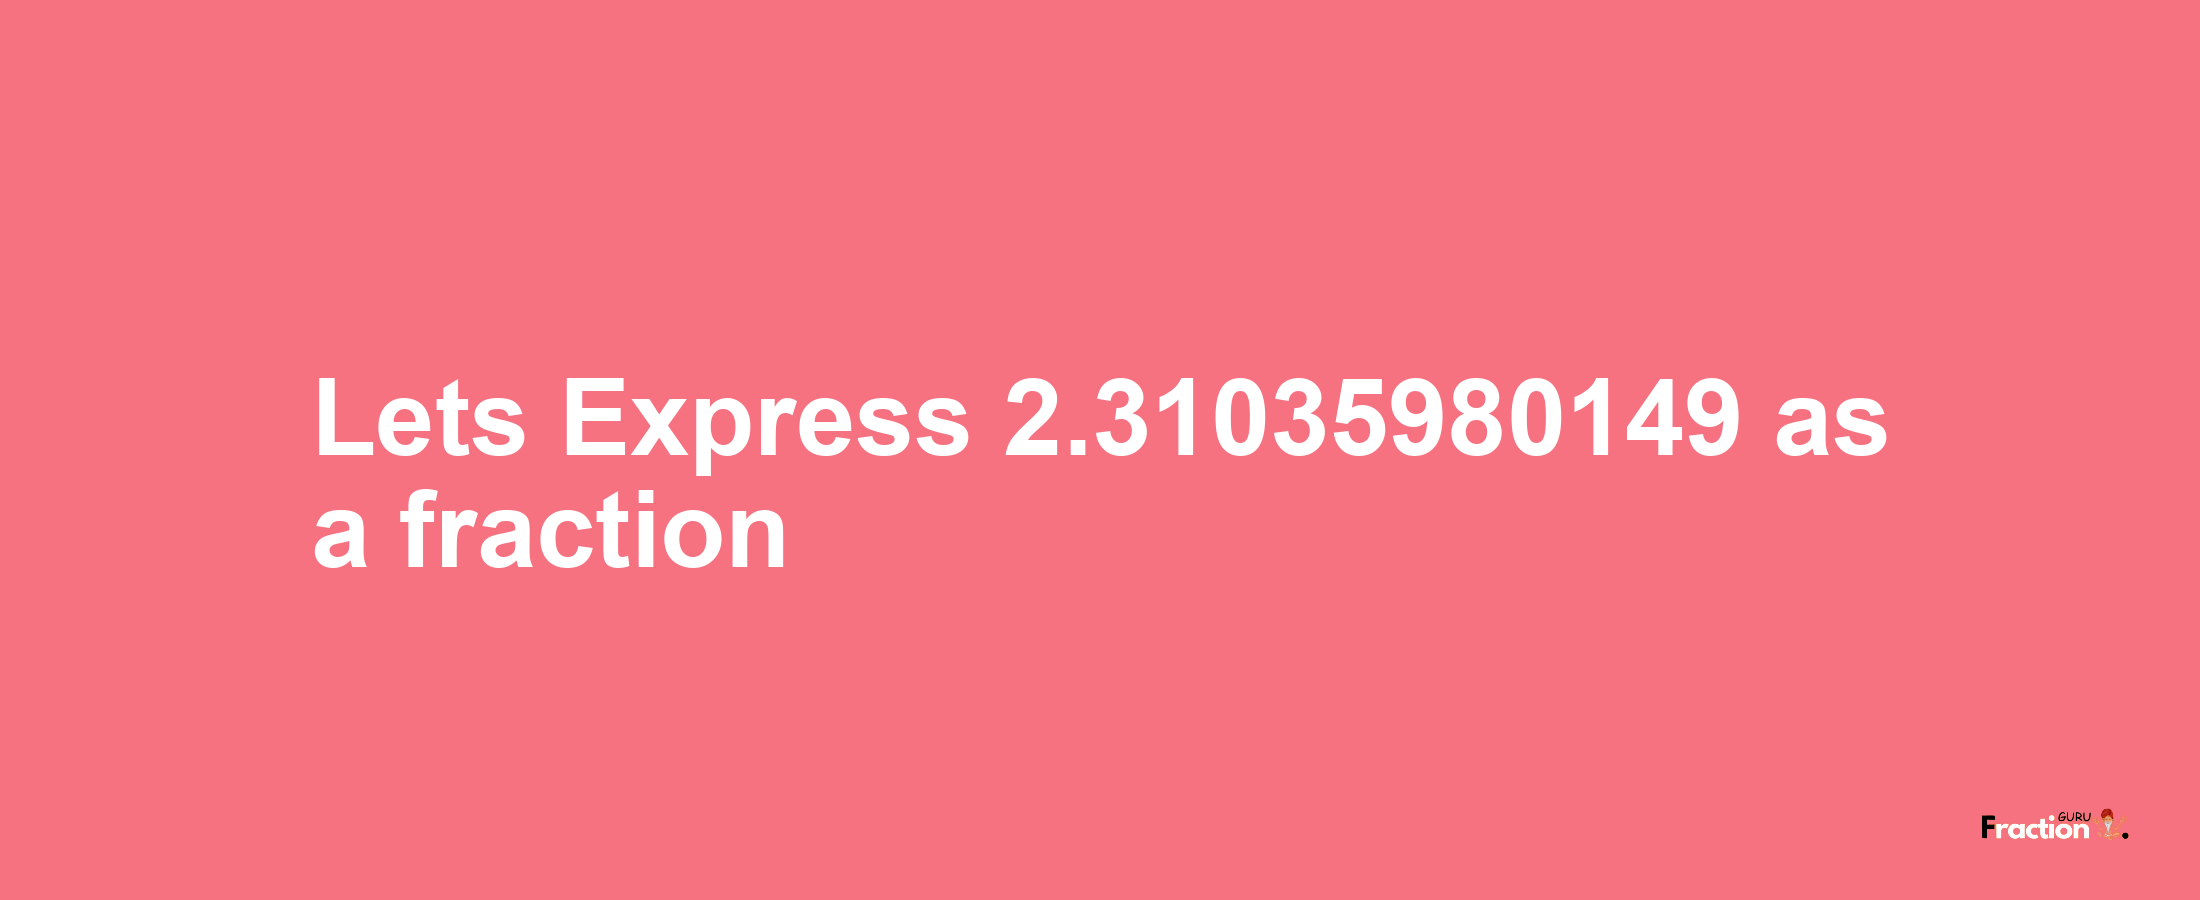 Lets Express 2.31035980149 as afraction